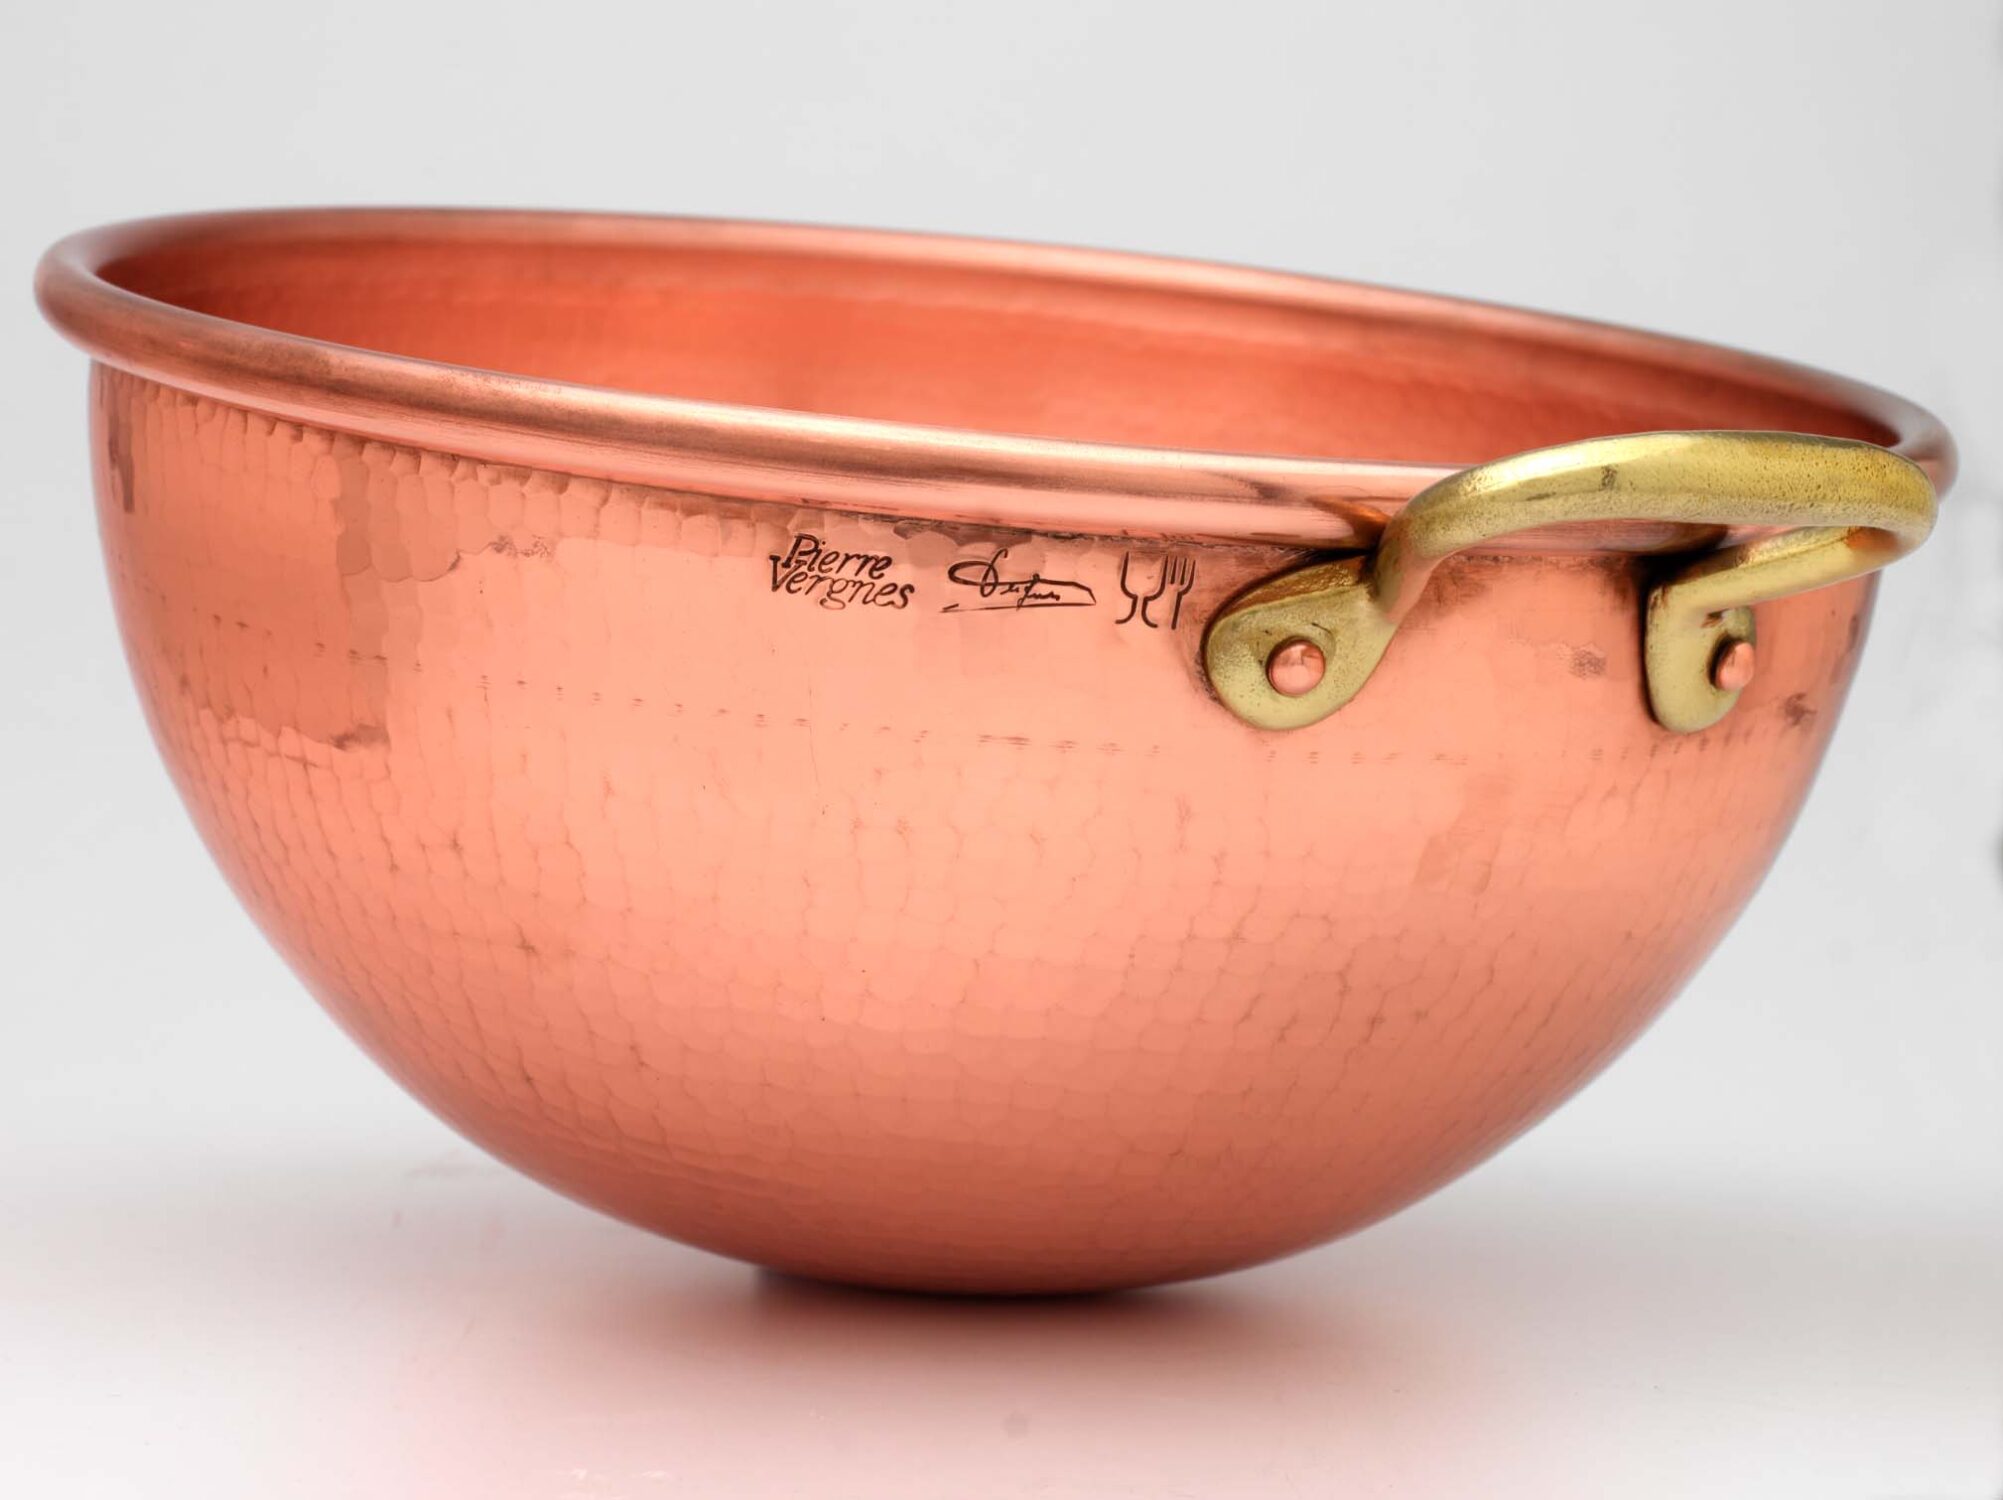 Copper Mixing Bowl with Hand-Engraved Leaves 11.8 x 6